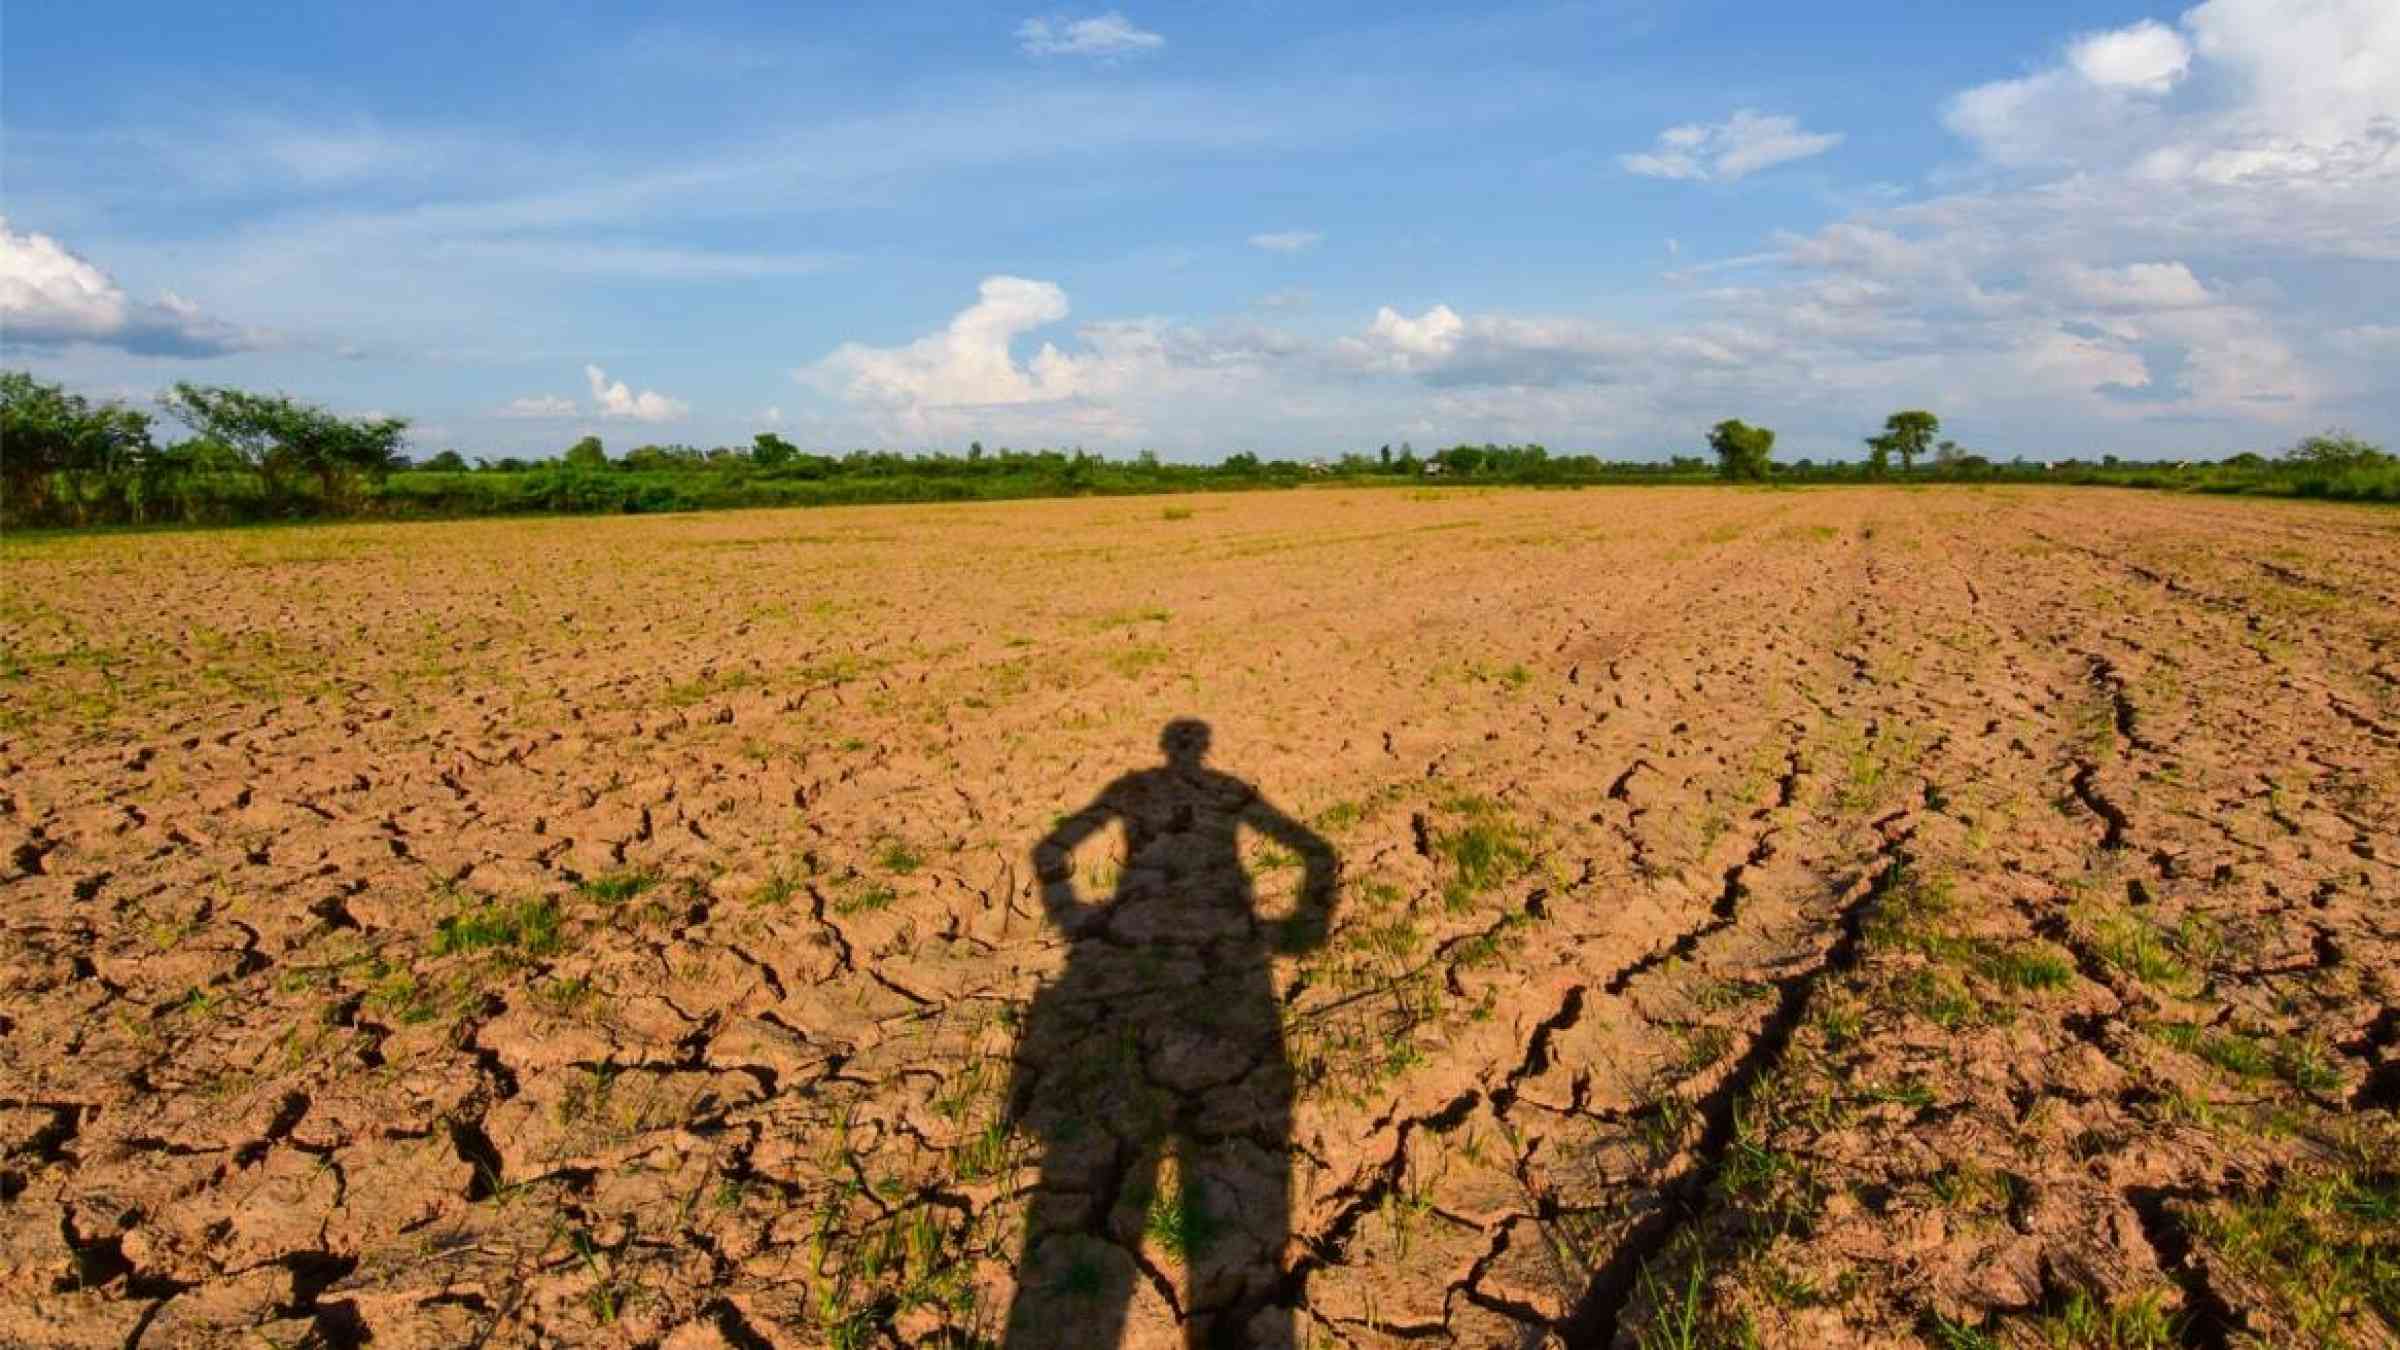 Human silhouette over a dry field